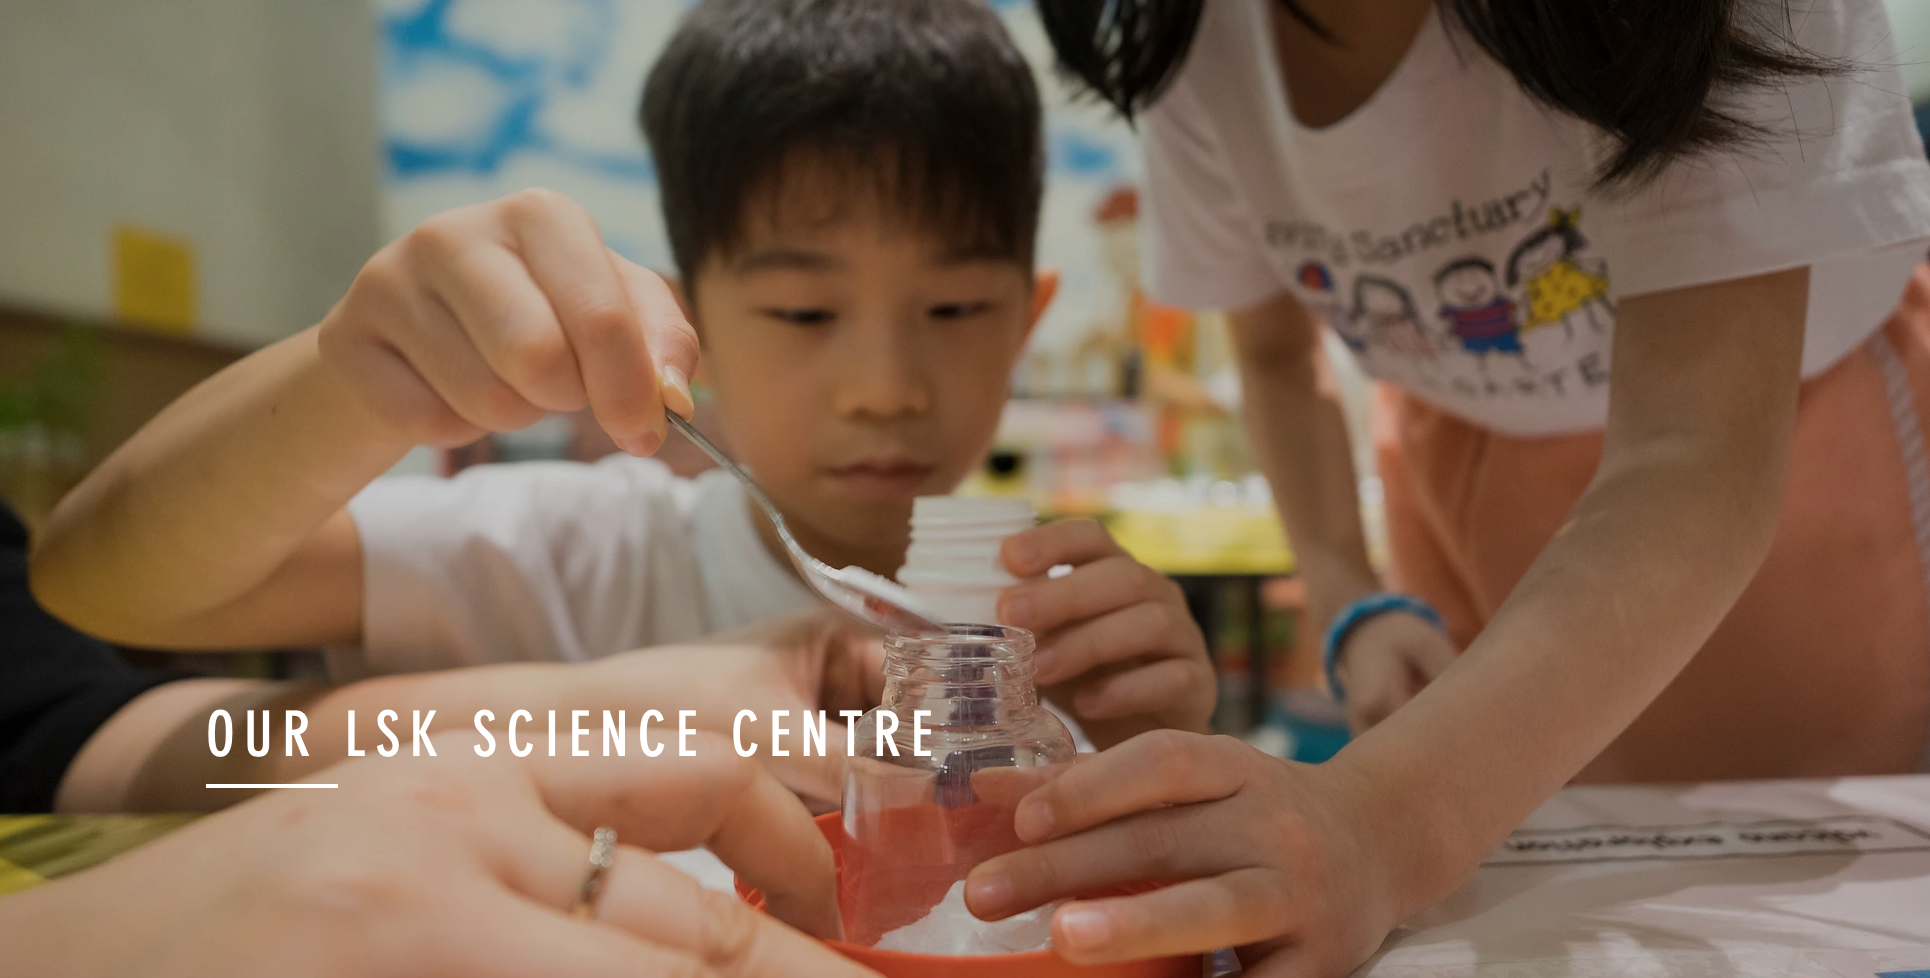 Most kindergartens do try to let the child learn through experiments and play. 